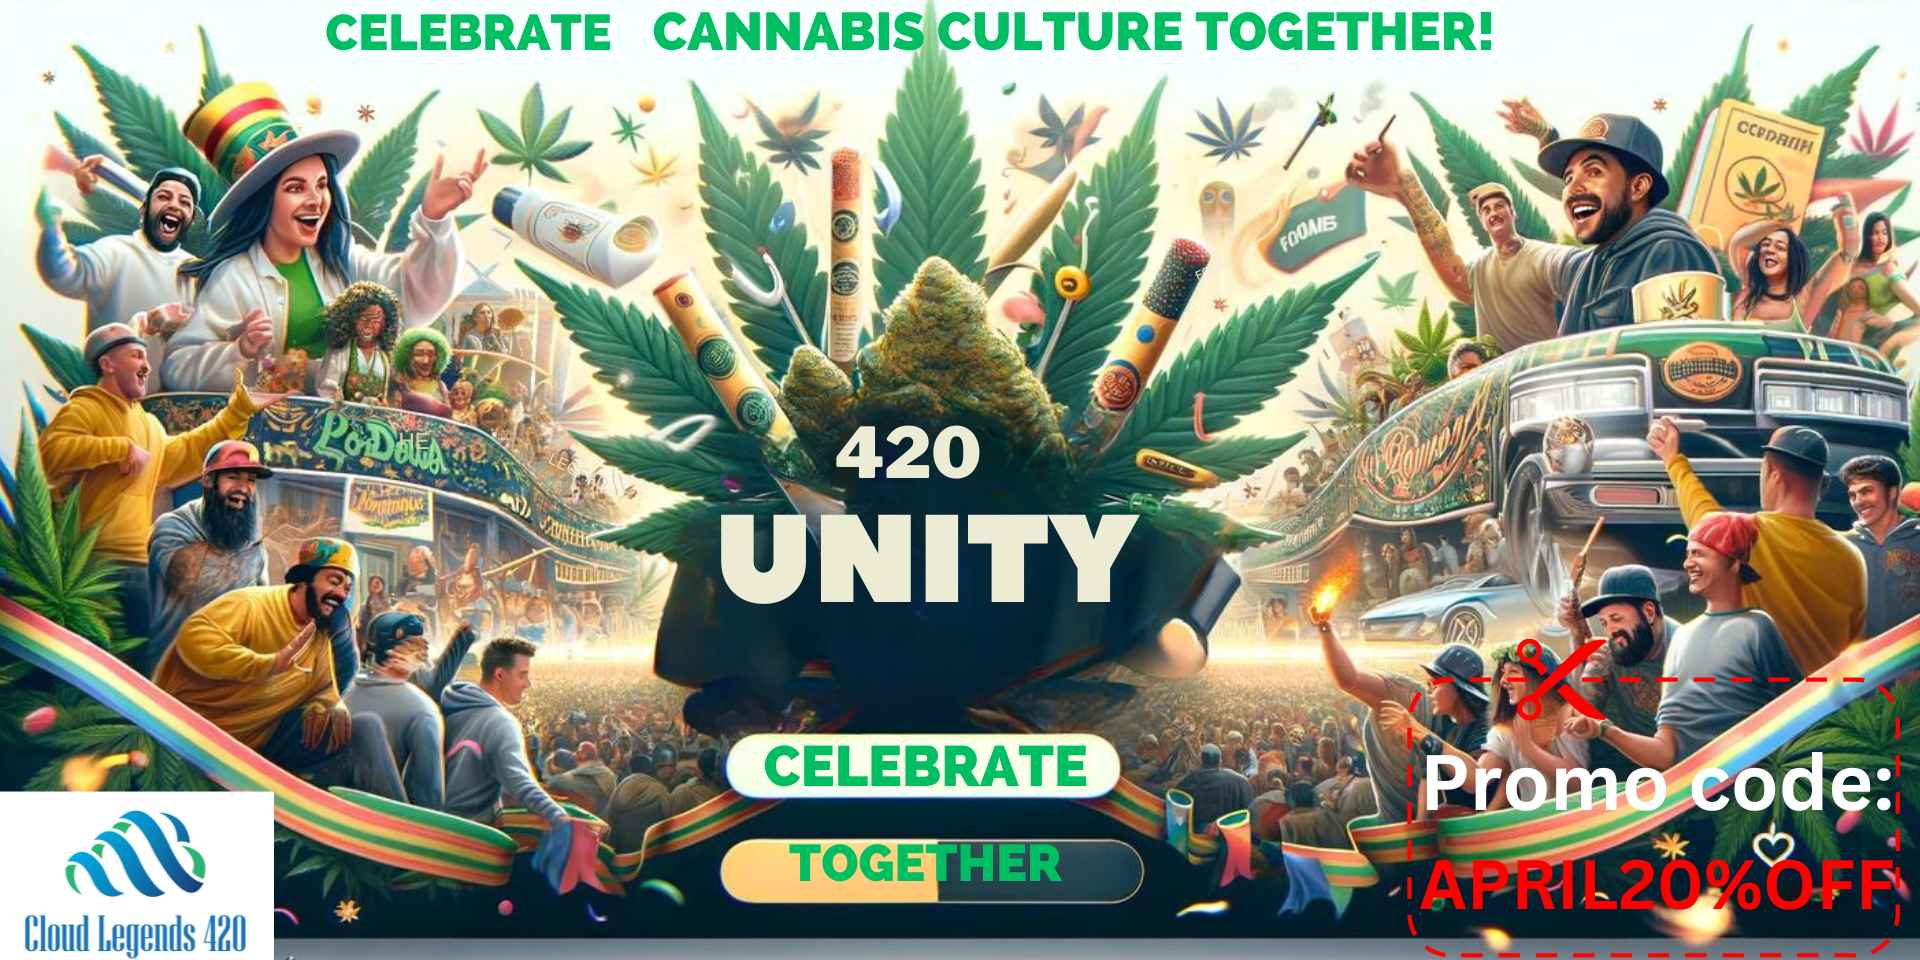 420 celebration banner with 20% off promo code by Cloud Legends 420